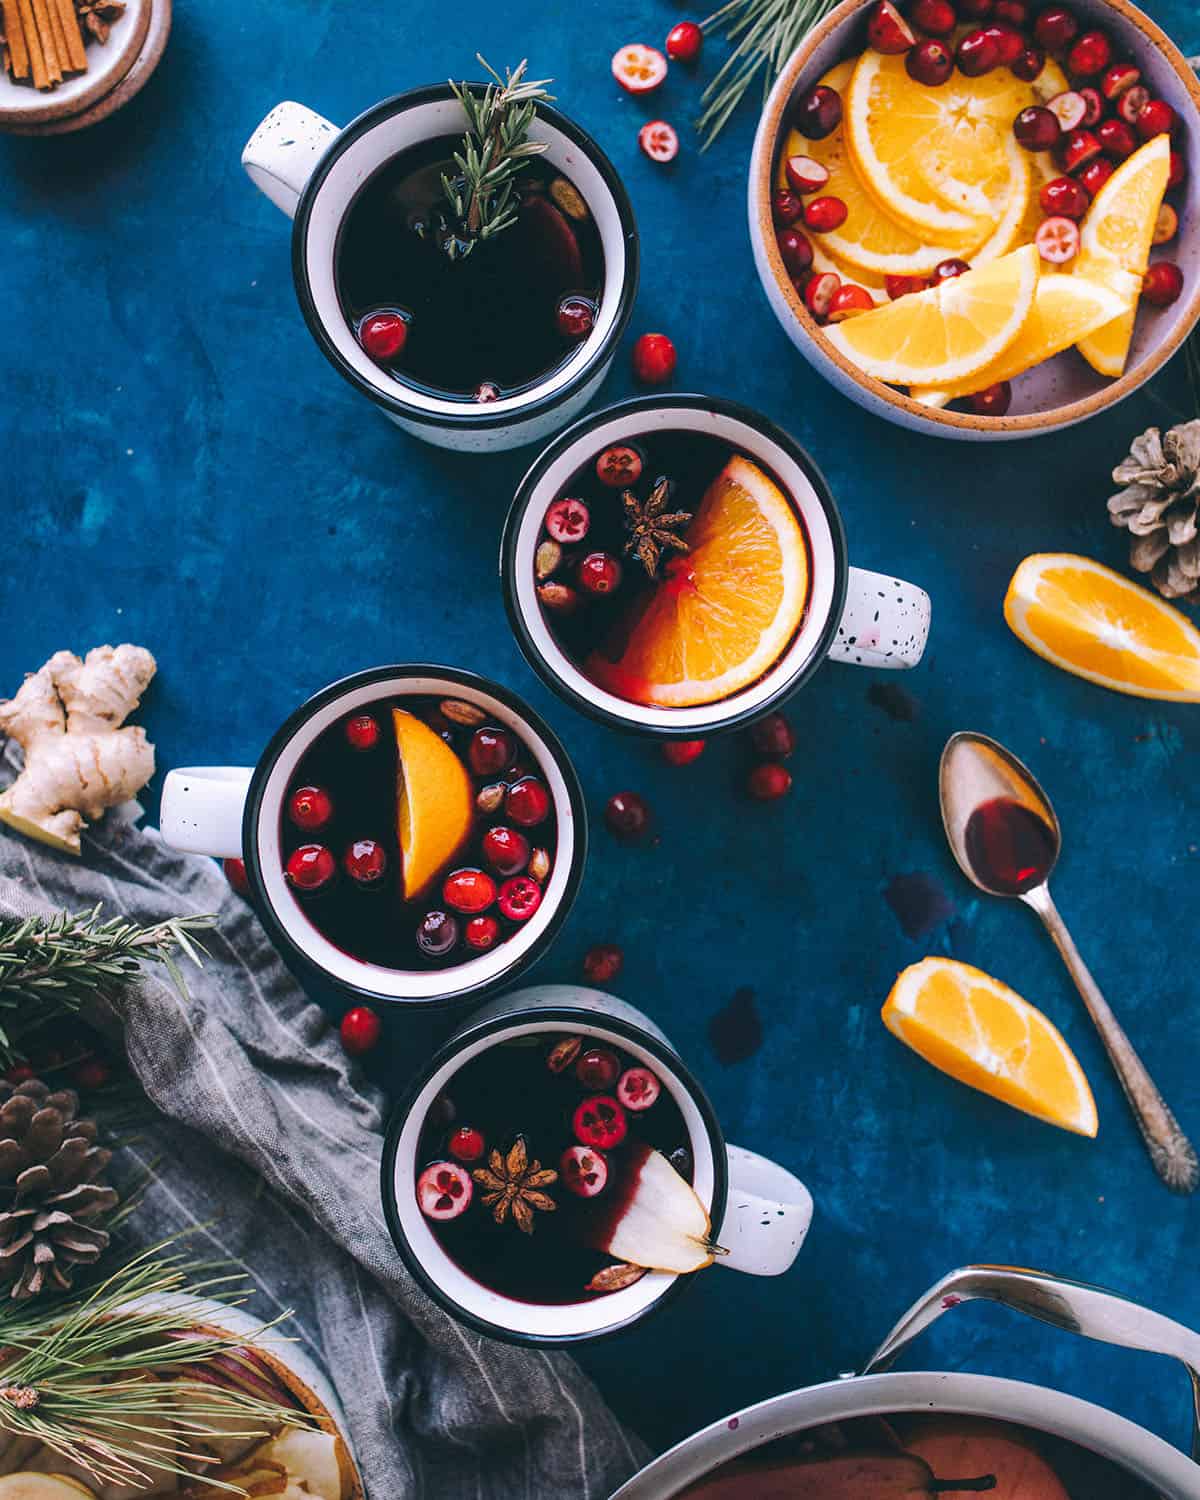 Mulled wine in mugs, garnished with cranberries and orange slices, with a dark background, and a bowl of orange slices to the side. Top view.